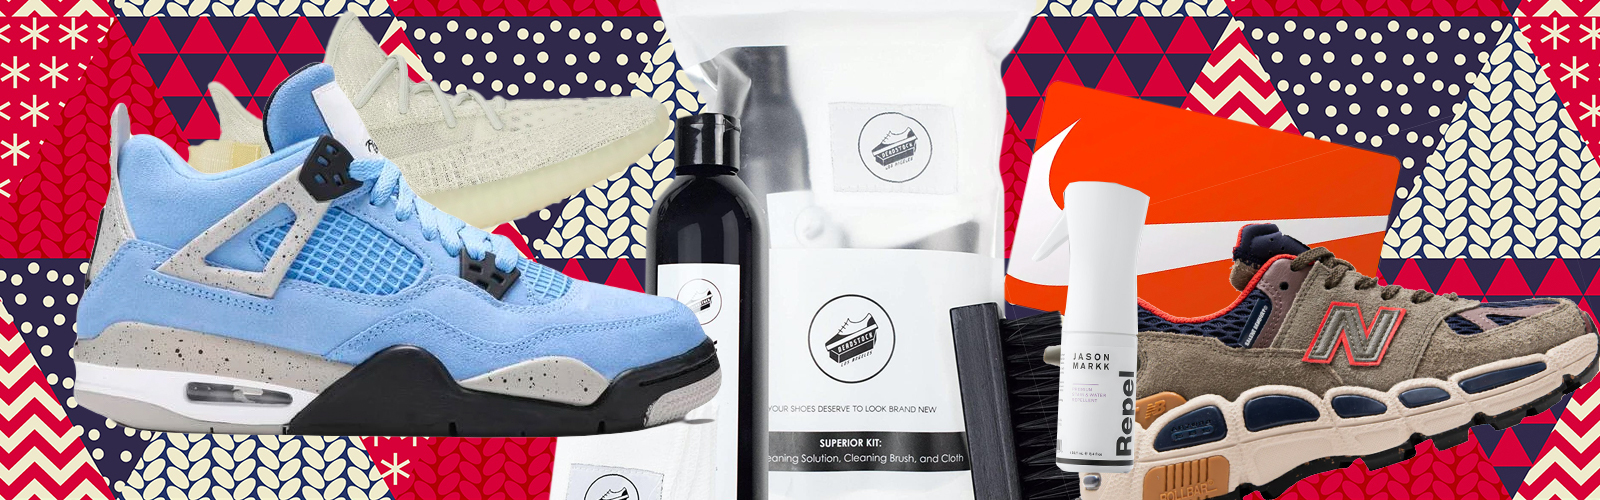 20 BEST Gifts For Sneakerheads For Holidays  YouTube